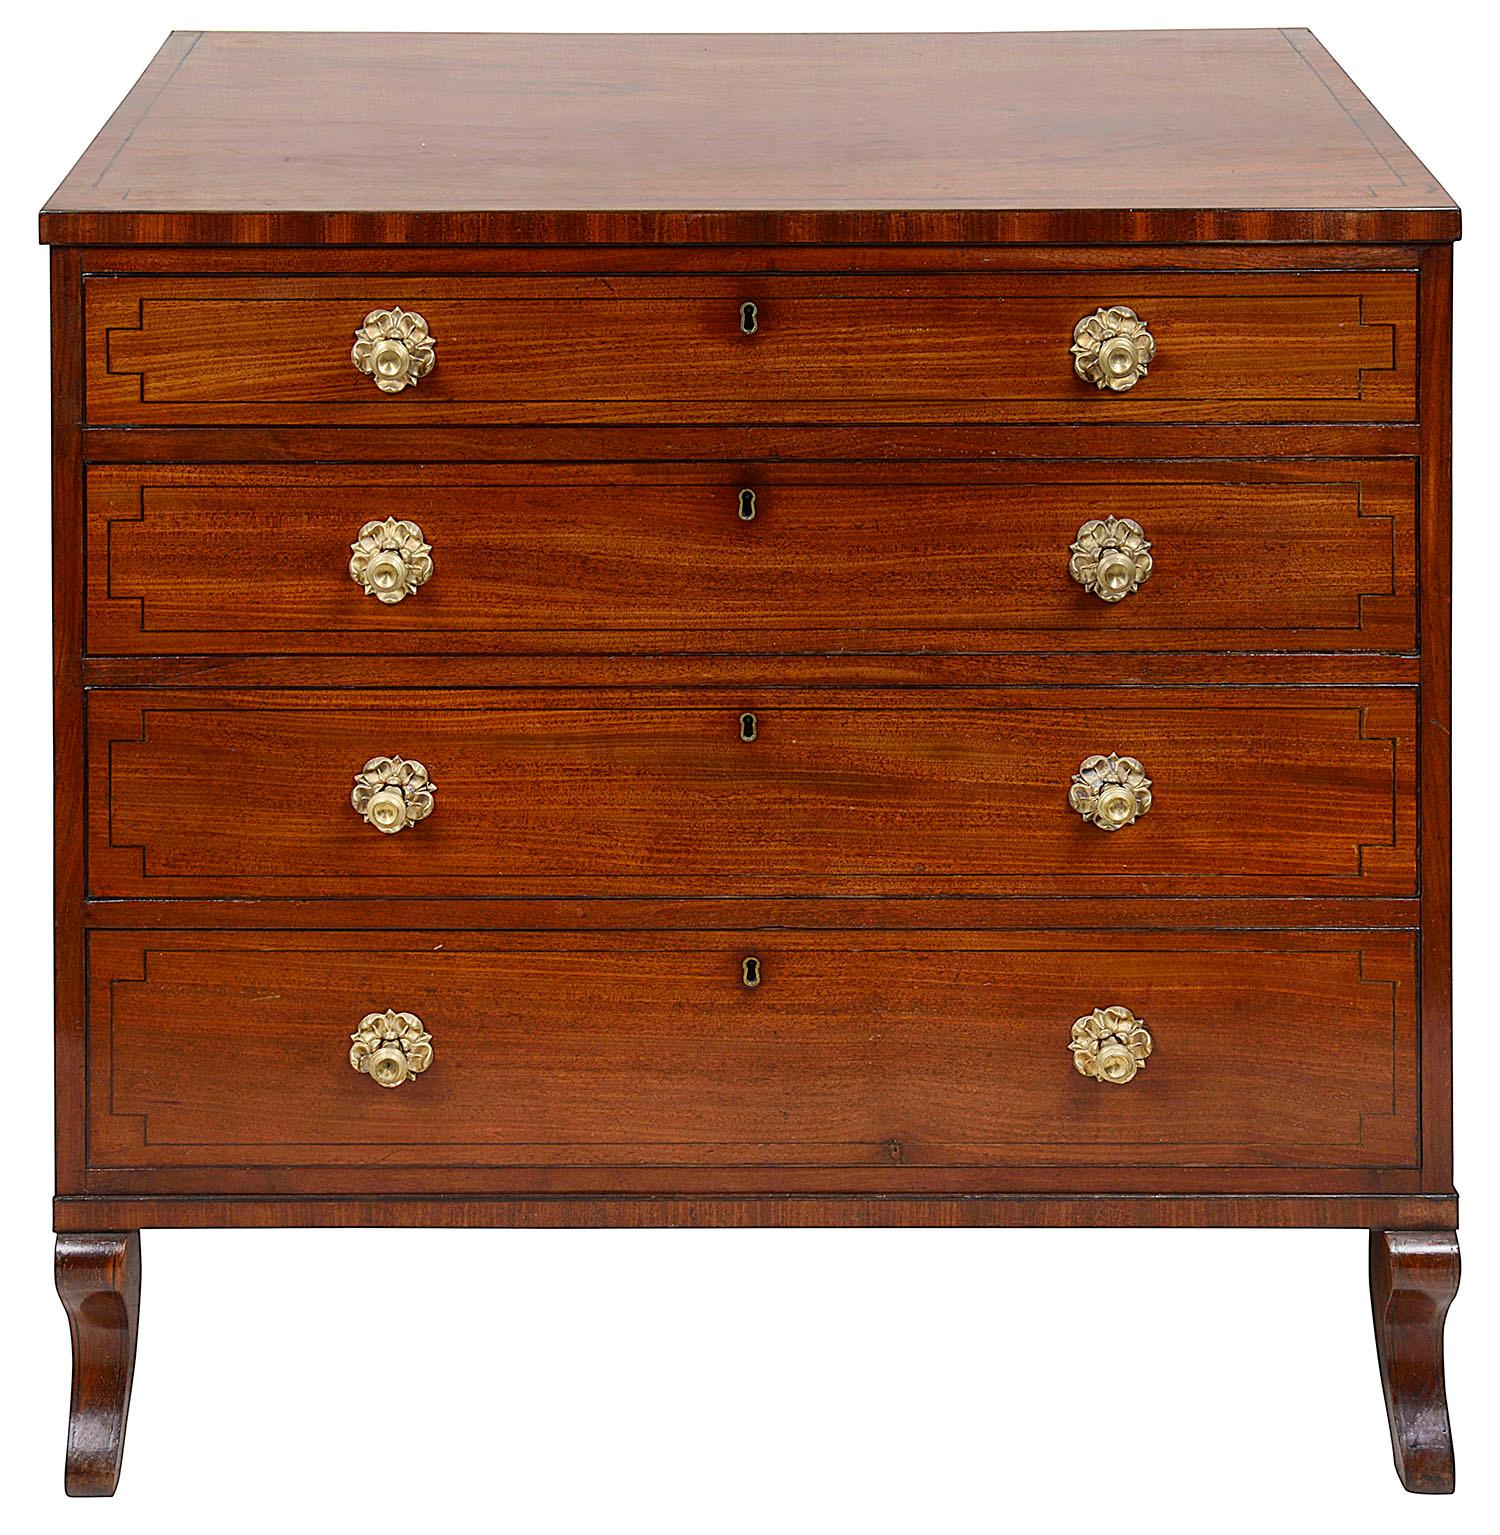 A very good quality early 19th century Regency period mahogany chest of drawers, having a crossbanded top, ebony string inlay to the fronts of the four graduating drawers, each having their original flower pedal like handles, and raised on four out